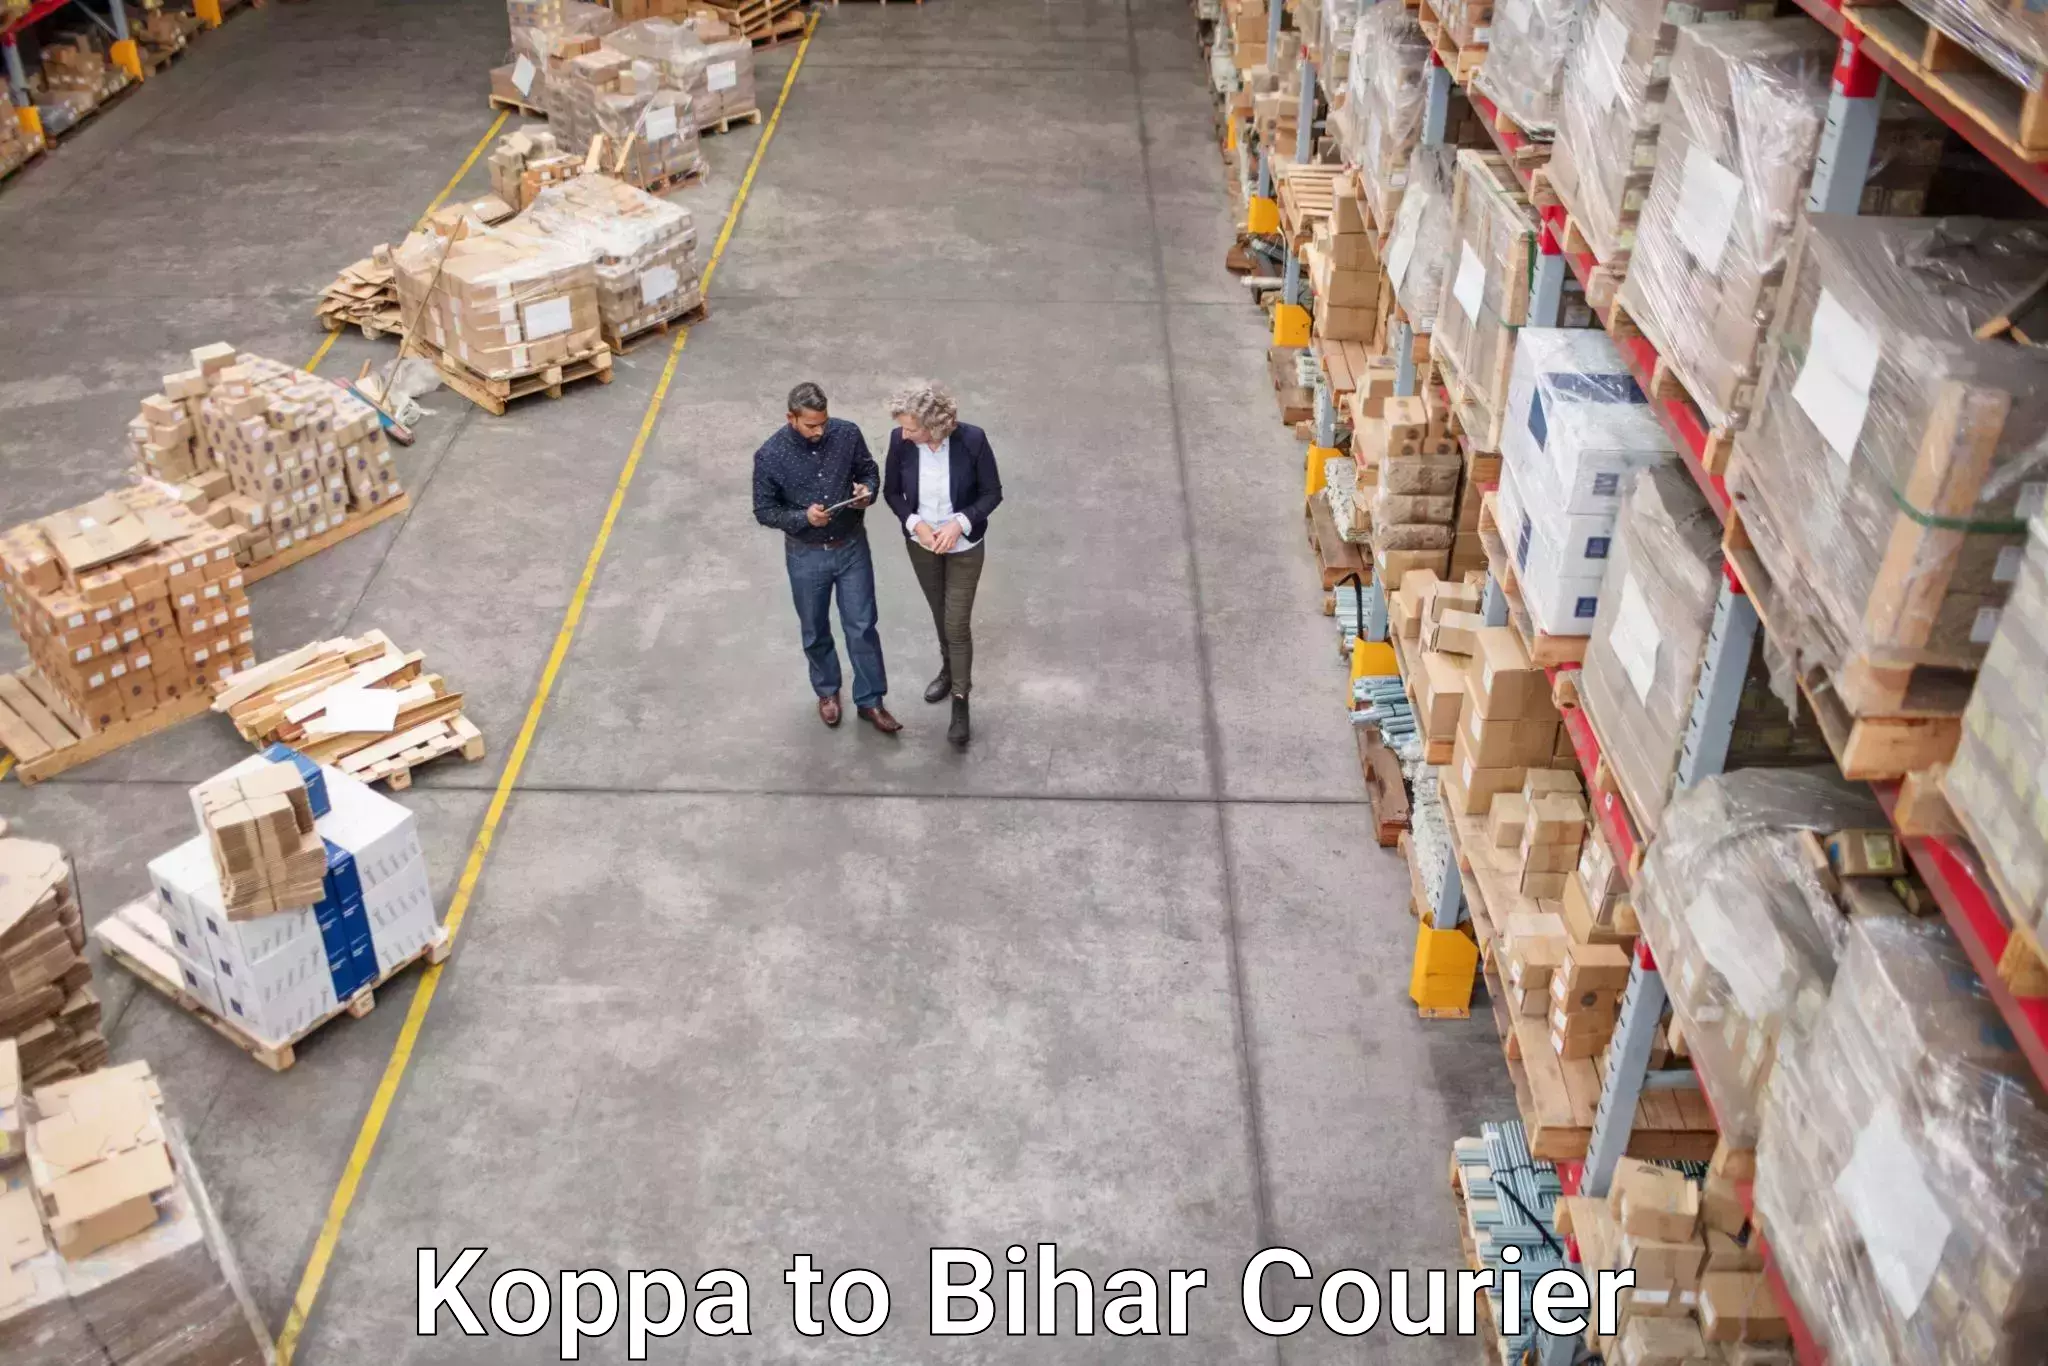 Subscription-based courier Koppa to Kamtaul